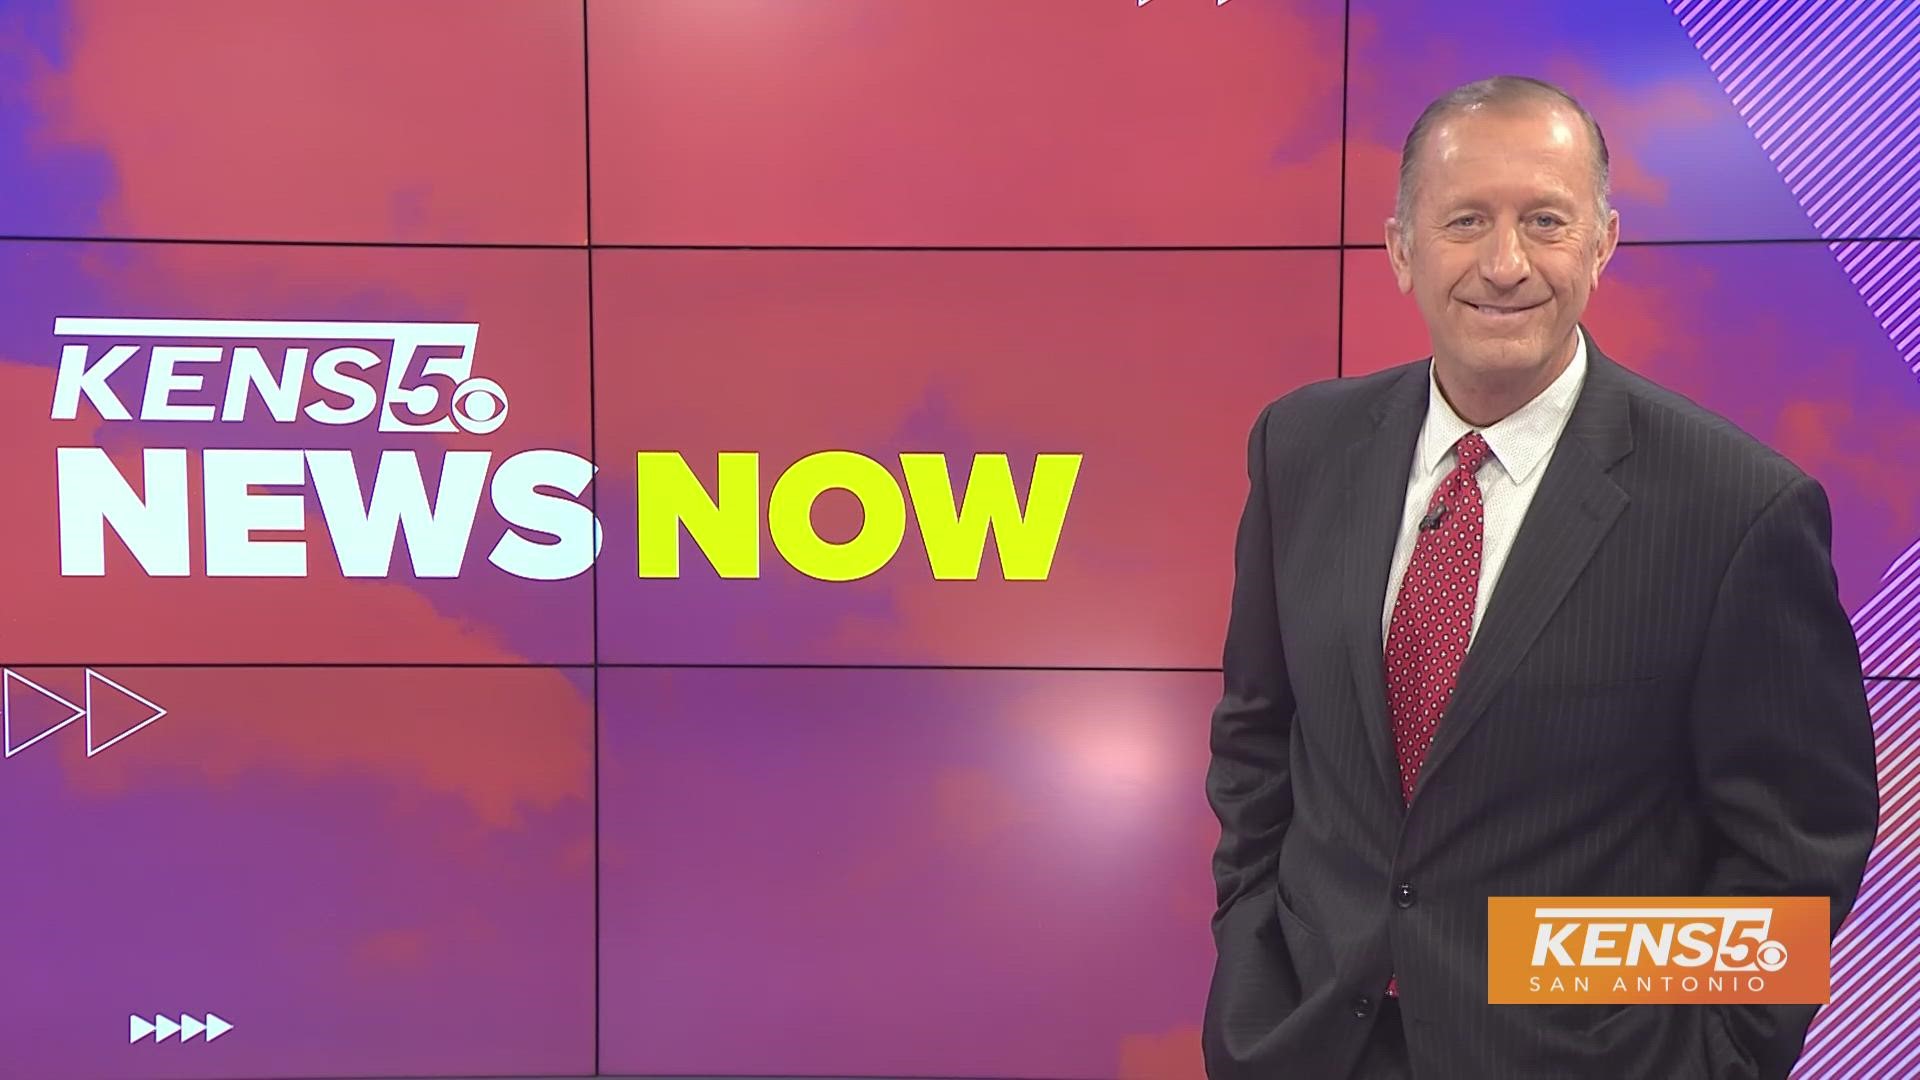 Follow us here to get the latest top headlines with the KENS 5 morning news team every weekday.